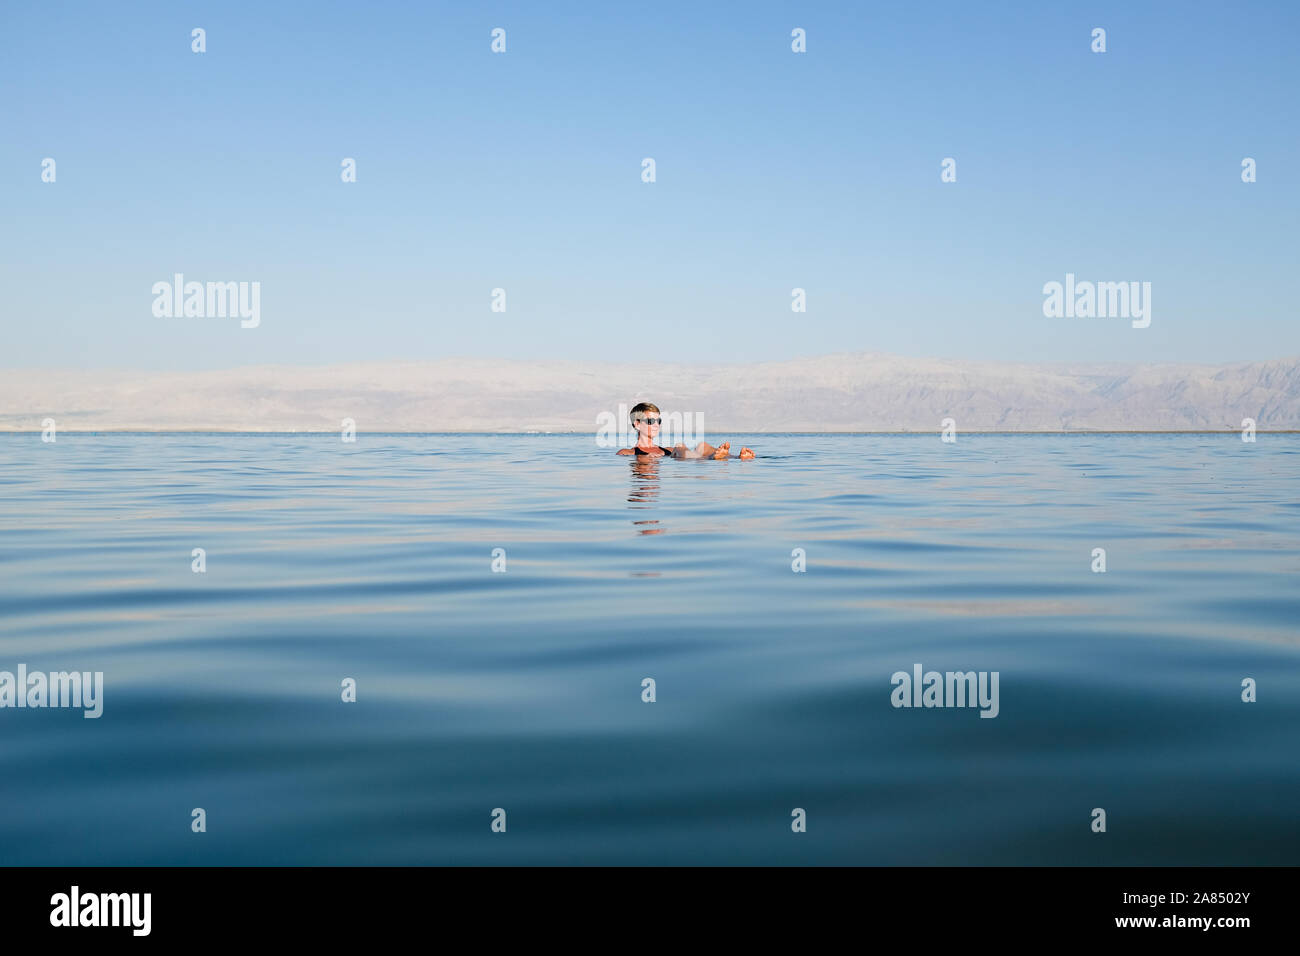 Single tourist floating in the Dead Sea Stock Photo